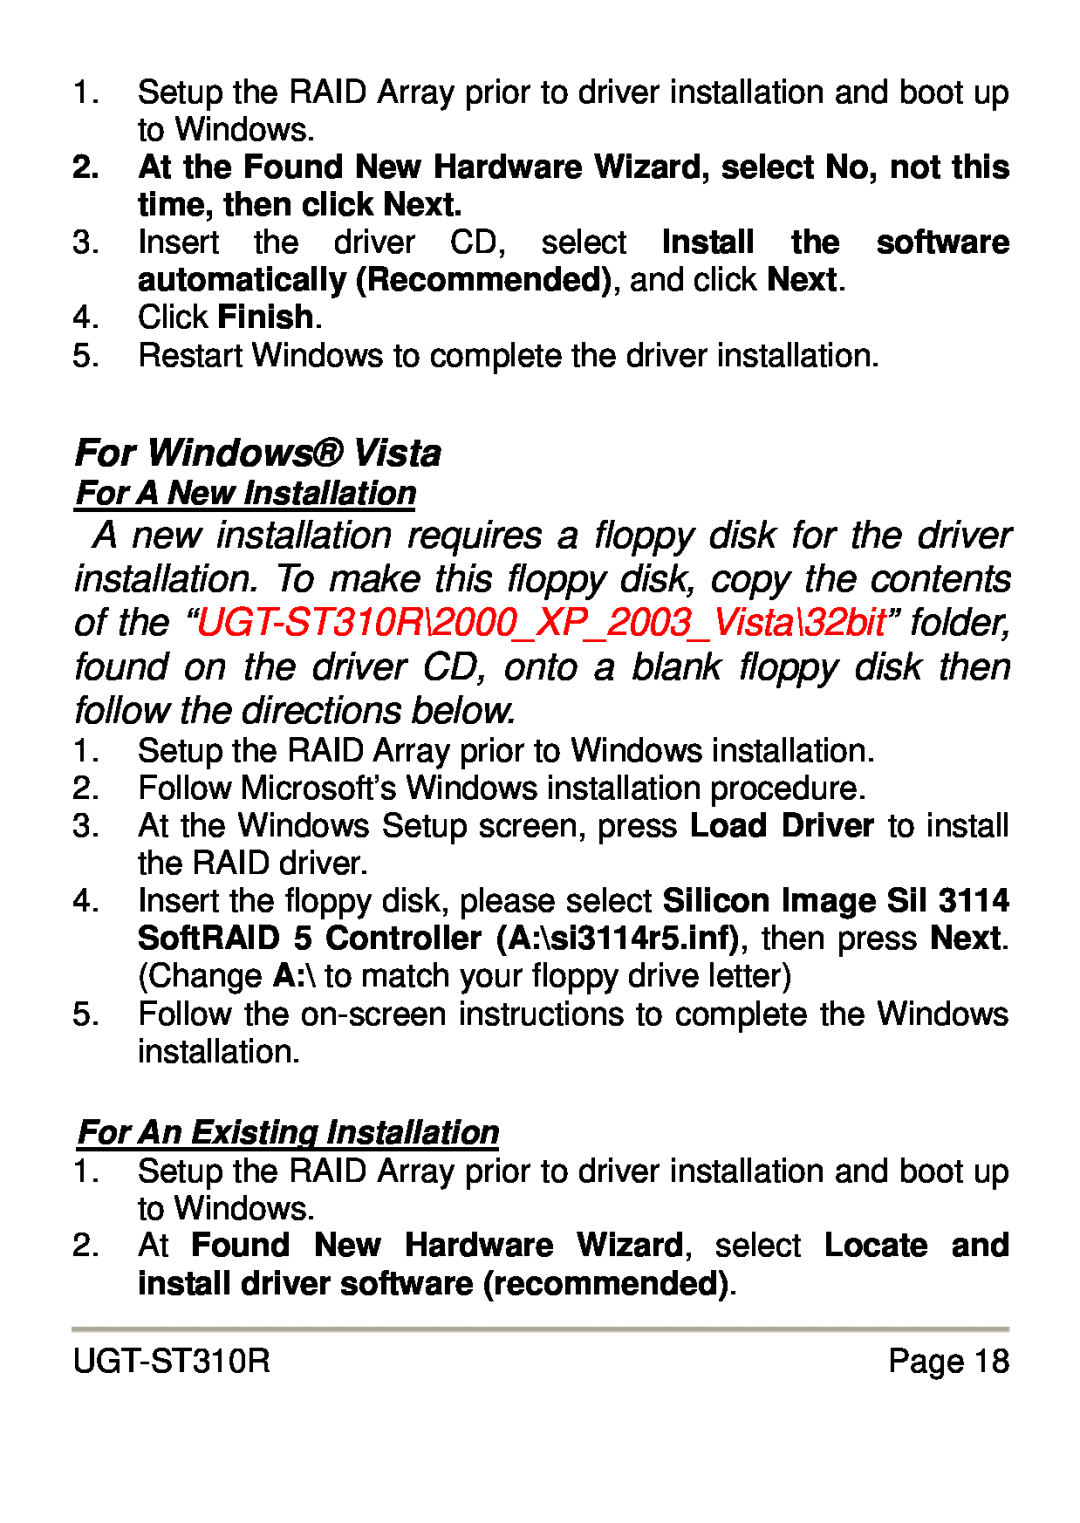 Vantec UGT-ST310R user manual For Windows Vista, For A New Installation, For An Existing Installation 